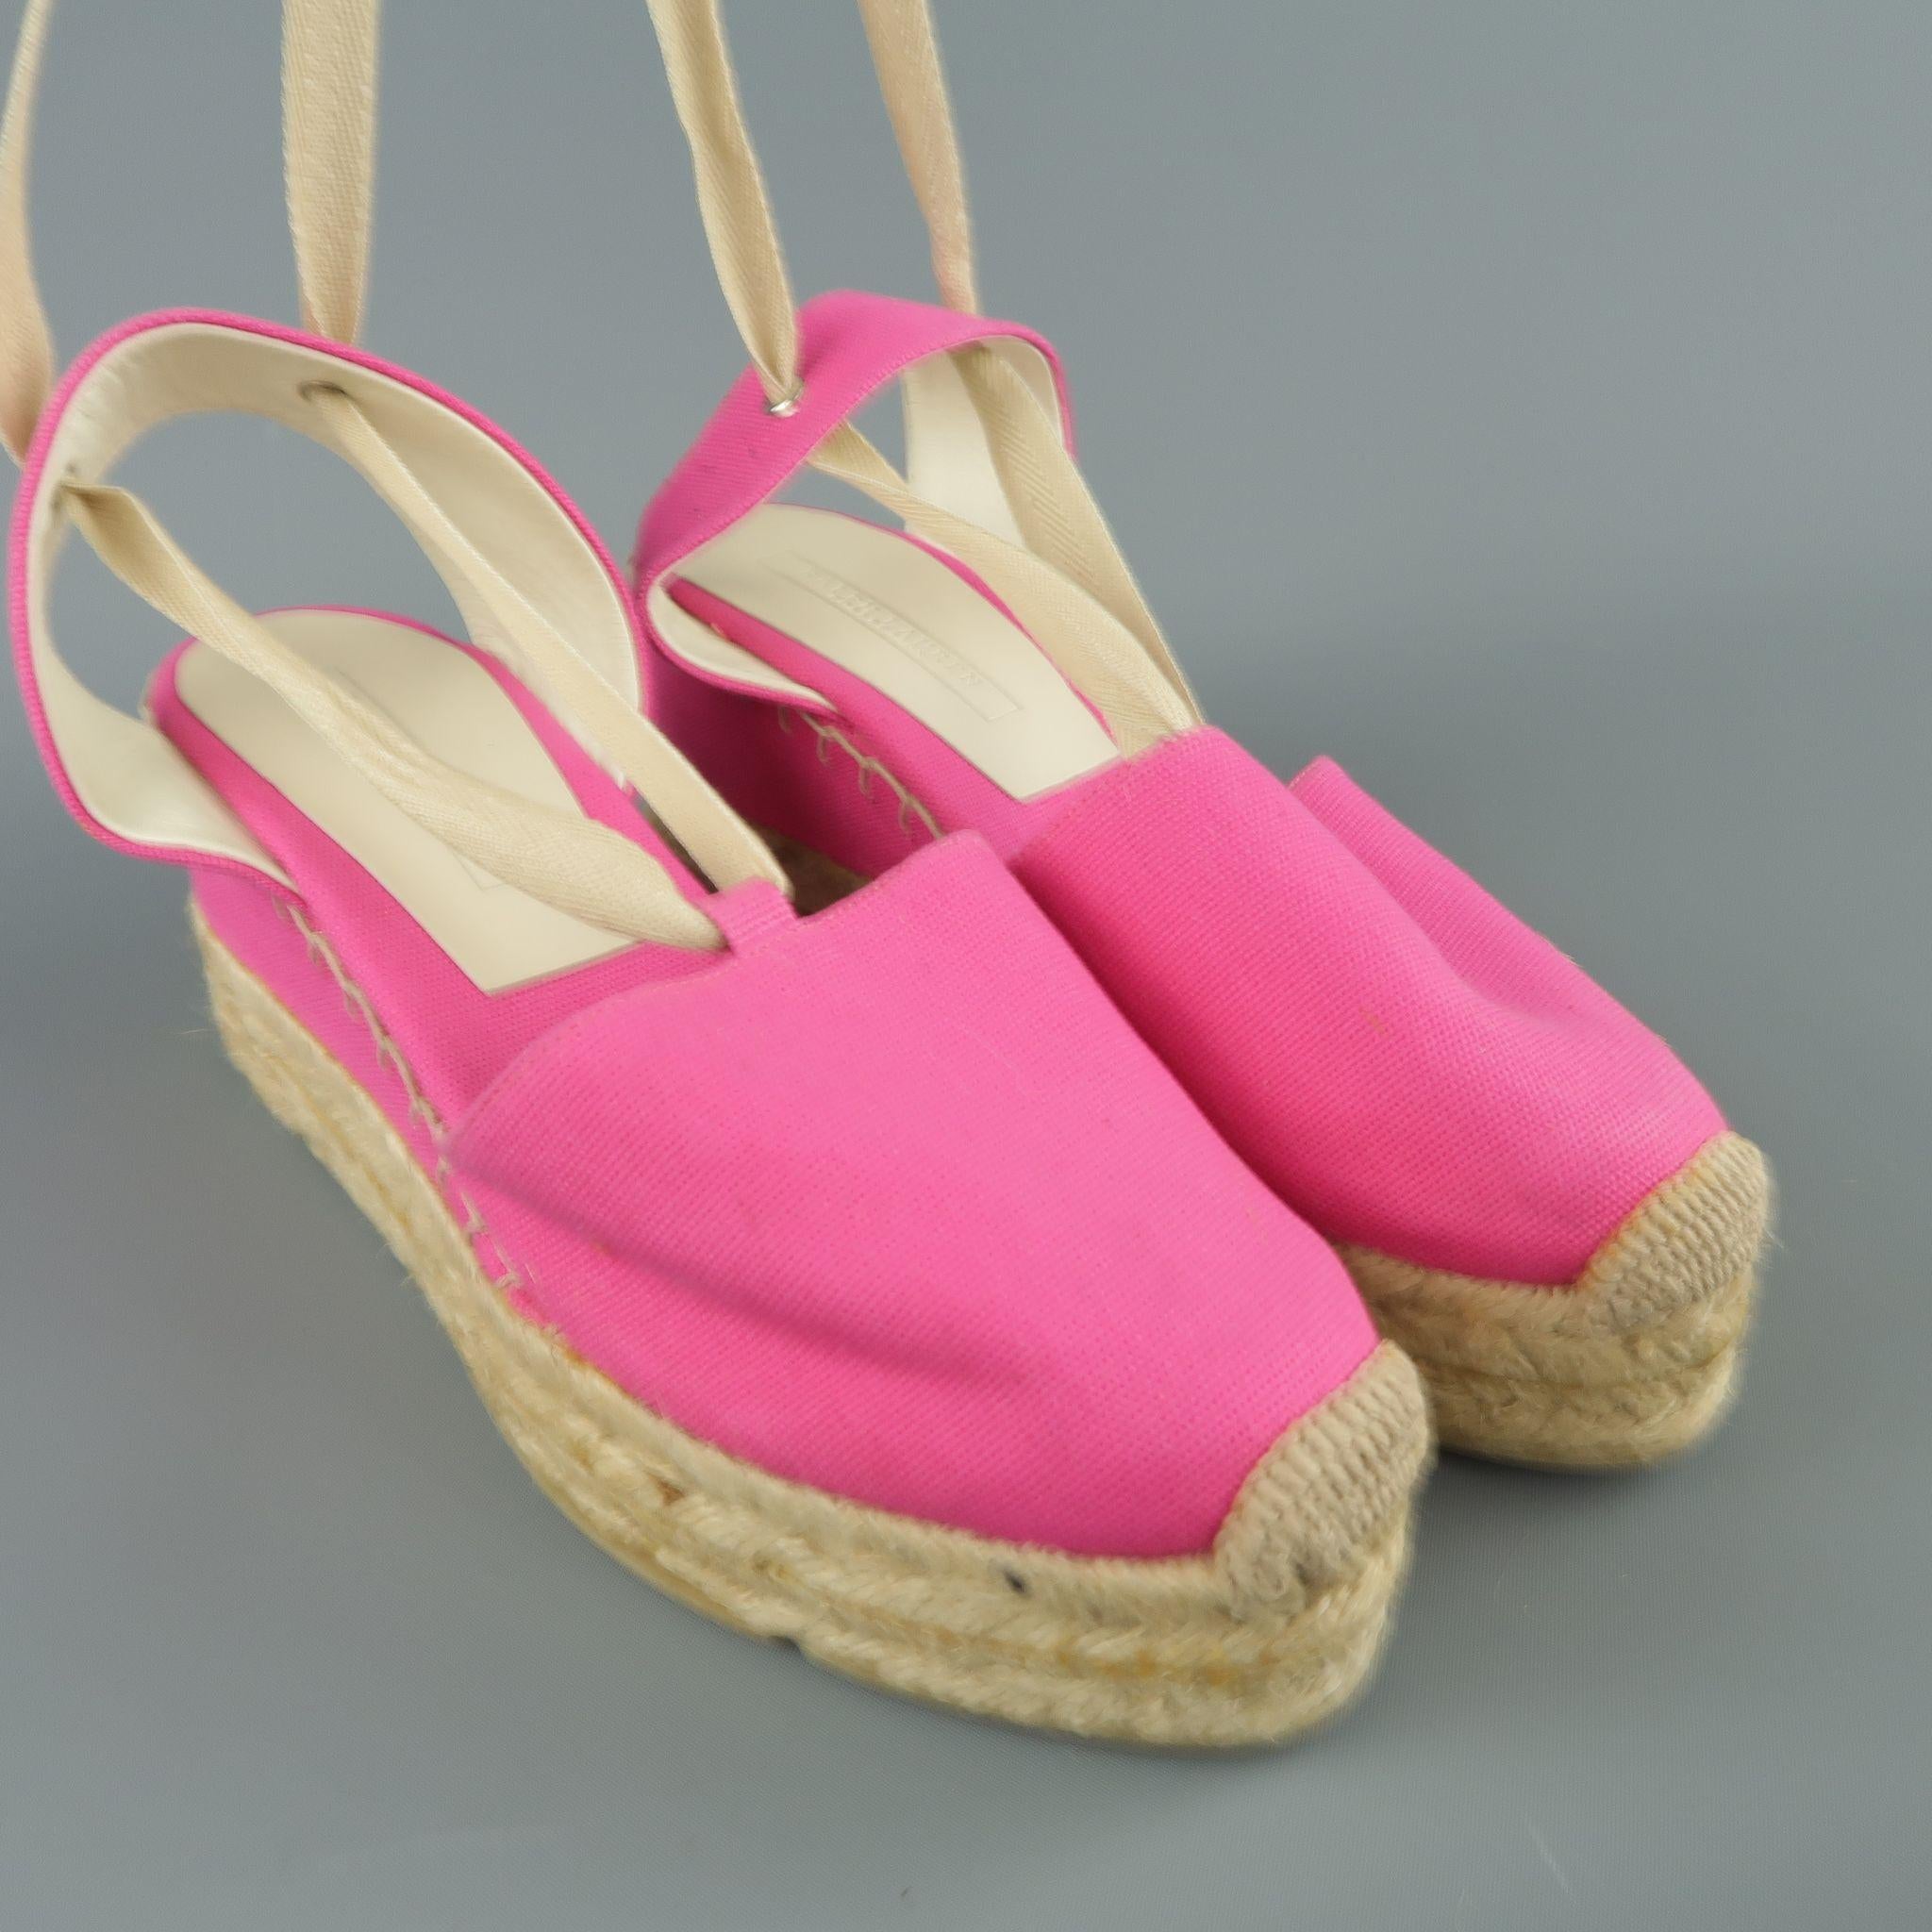 RALPH LAUREN COLLECTION espadrilles come in hot pink canvas with a slingback with ankle ties and platform wedge sole.  
 
Excellent Pre-Owned Condition.
Marked: 10
 
Heel: 2.5 in.
SKU: 88973
Category: Wedges

More Details
Brand: RALPH LAUREN
Size: